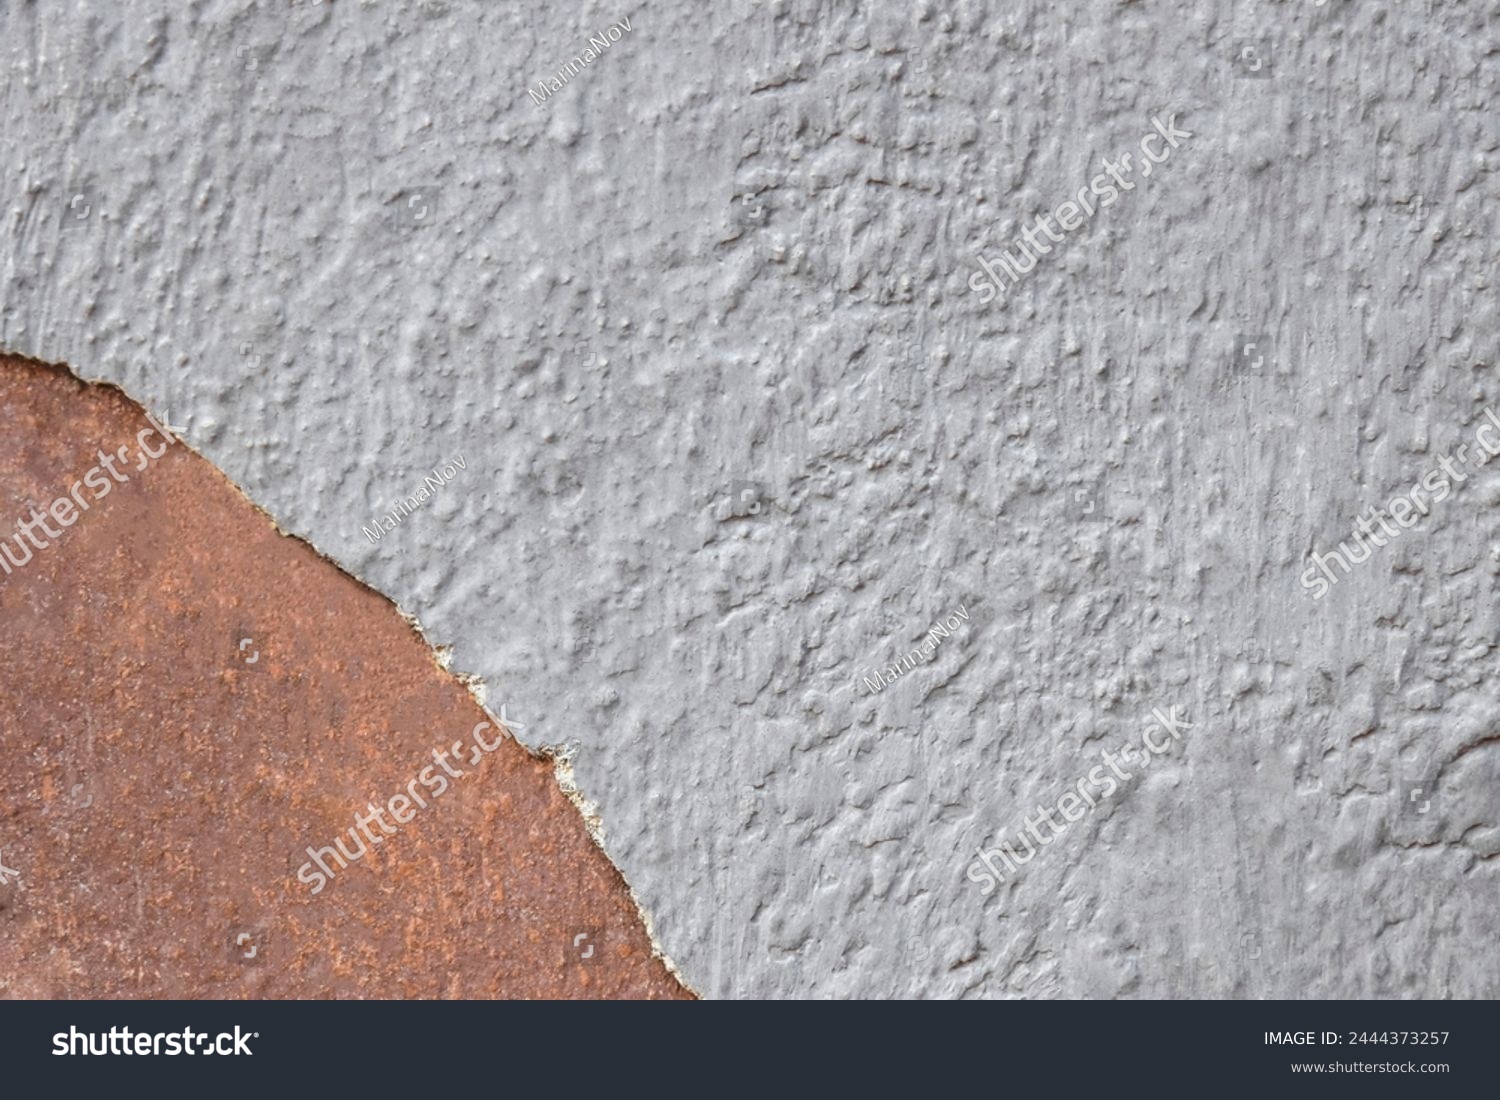 Colorful grey-brown wall surface of an old building with crumbling plaster as a textured background. Copy space. Selective focus. #2444373257